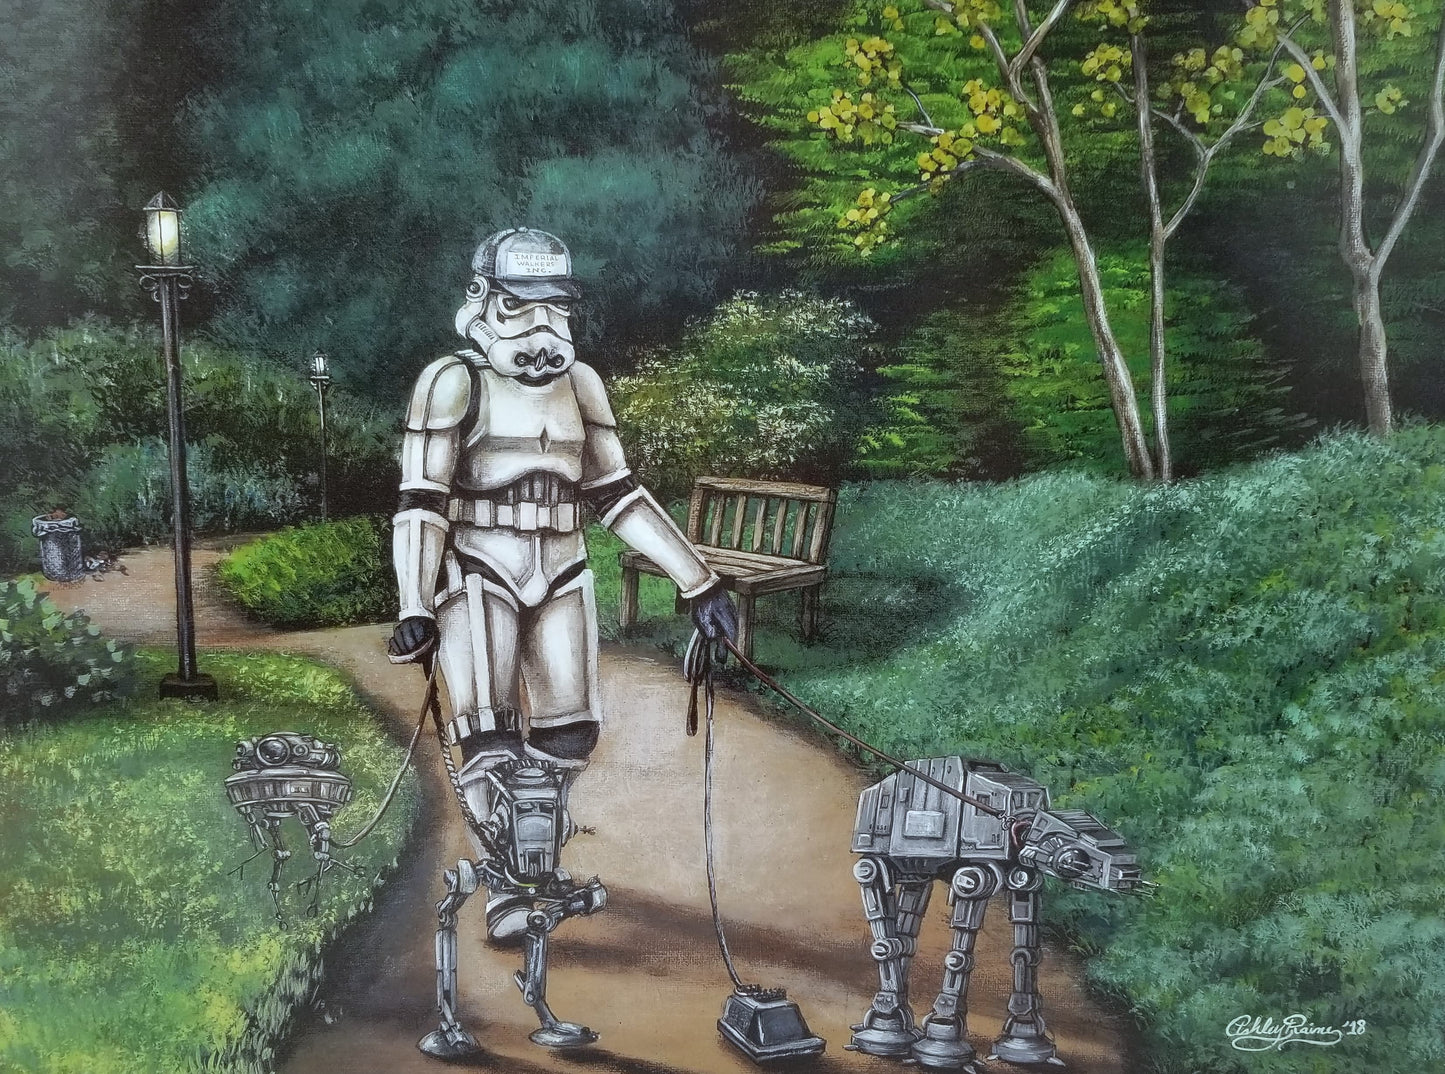 "Imperial Mark" Star Wars Parody Art Print by Ashley Raine  Our trusty Pup Walker Trooper from Imperial Walkers Inc. is out for an afternoon in the park with four of his imperial buddies. The probe droid and AT-ST 'Chicken Walker' are walking behind a bit, while MSE-6 'Mouse Droid', & our favorite AT-AT are ready to explore ahead and sniff out any rebel scum in the next shrubbery. 